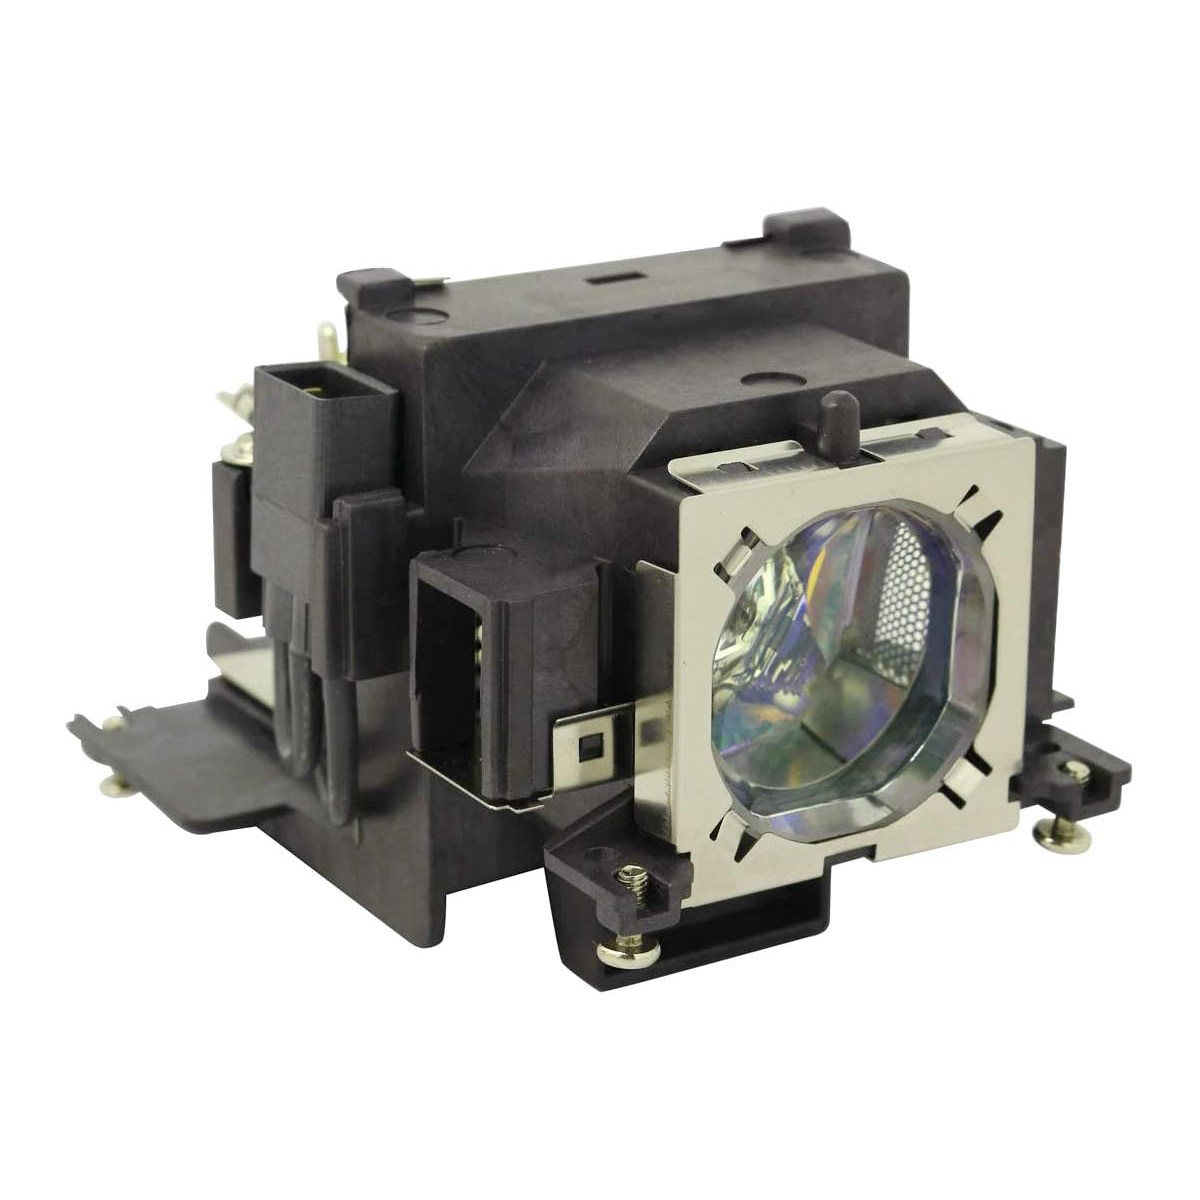 Replacement Projector lamp POA-LMP150 For Sanyo PLC-WU3001 PLC-XU4001